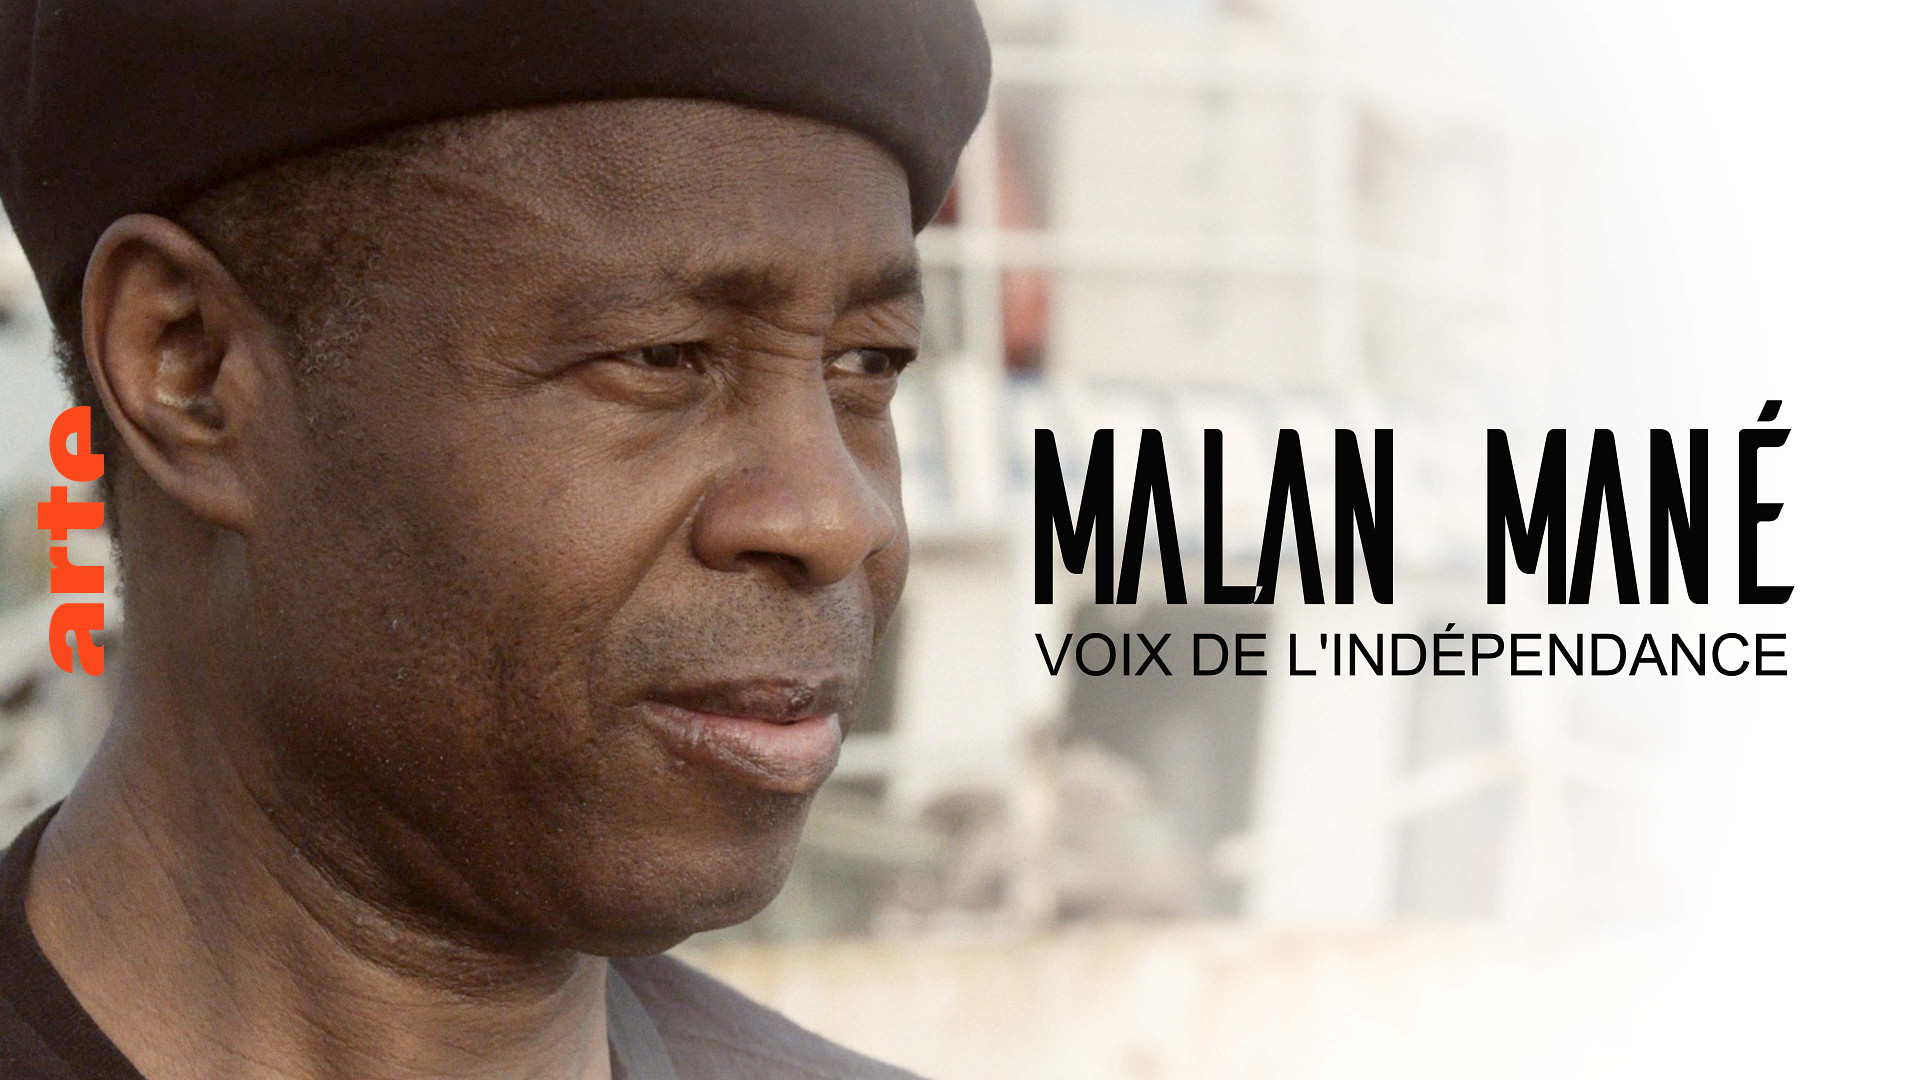 Bissau, Return of the Idol – Malan Mane, Voice of Independence – Watch the full documentary